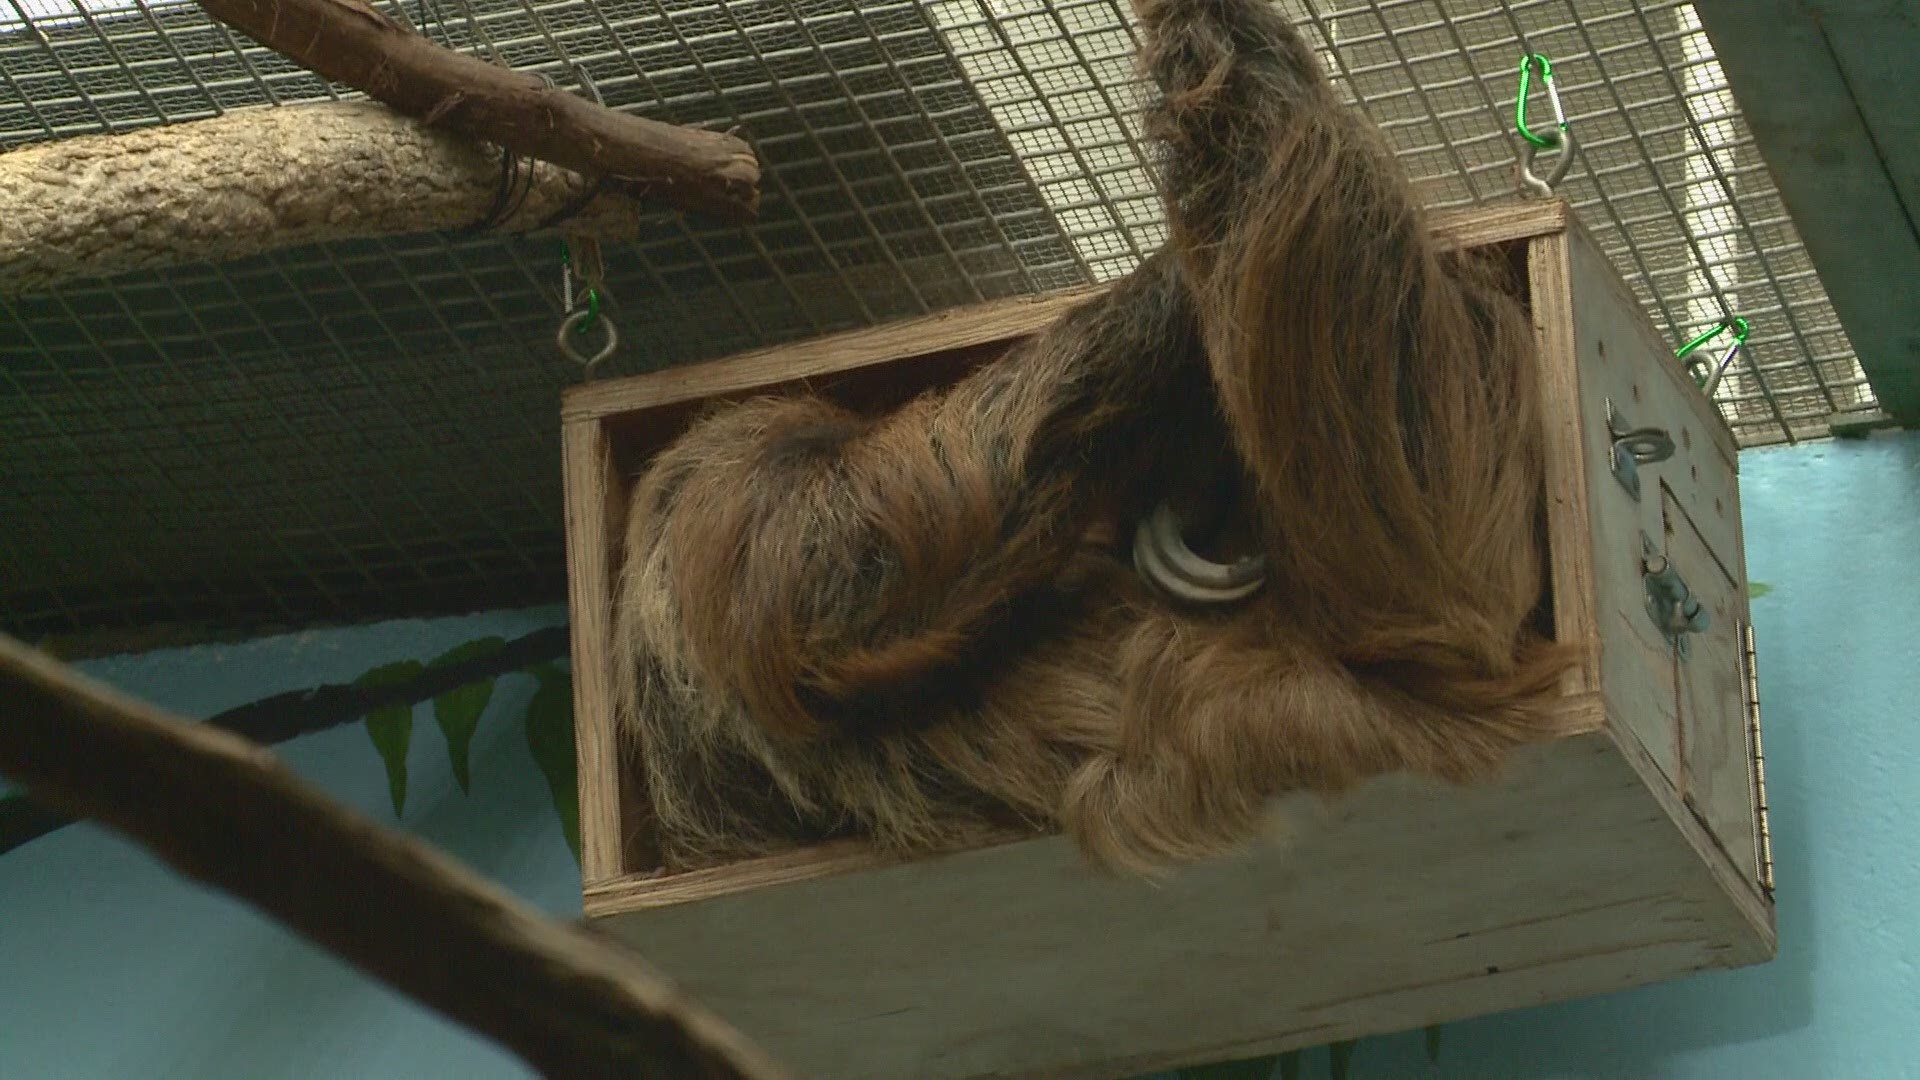 Athena, a 1.5-year-old Southern Two-Toed Sloth, was brought to D.C. from the Ellen Trout Zoo in Texas to mate with 33-year-old Vlad.